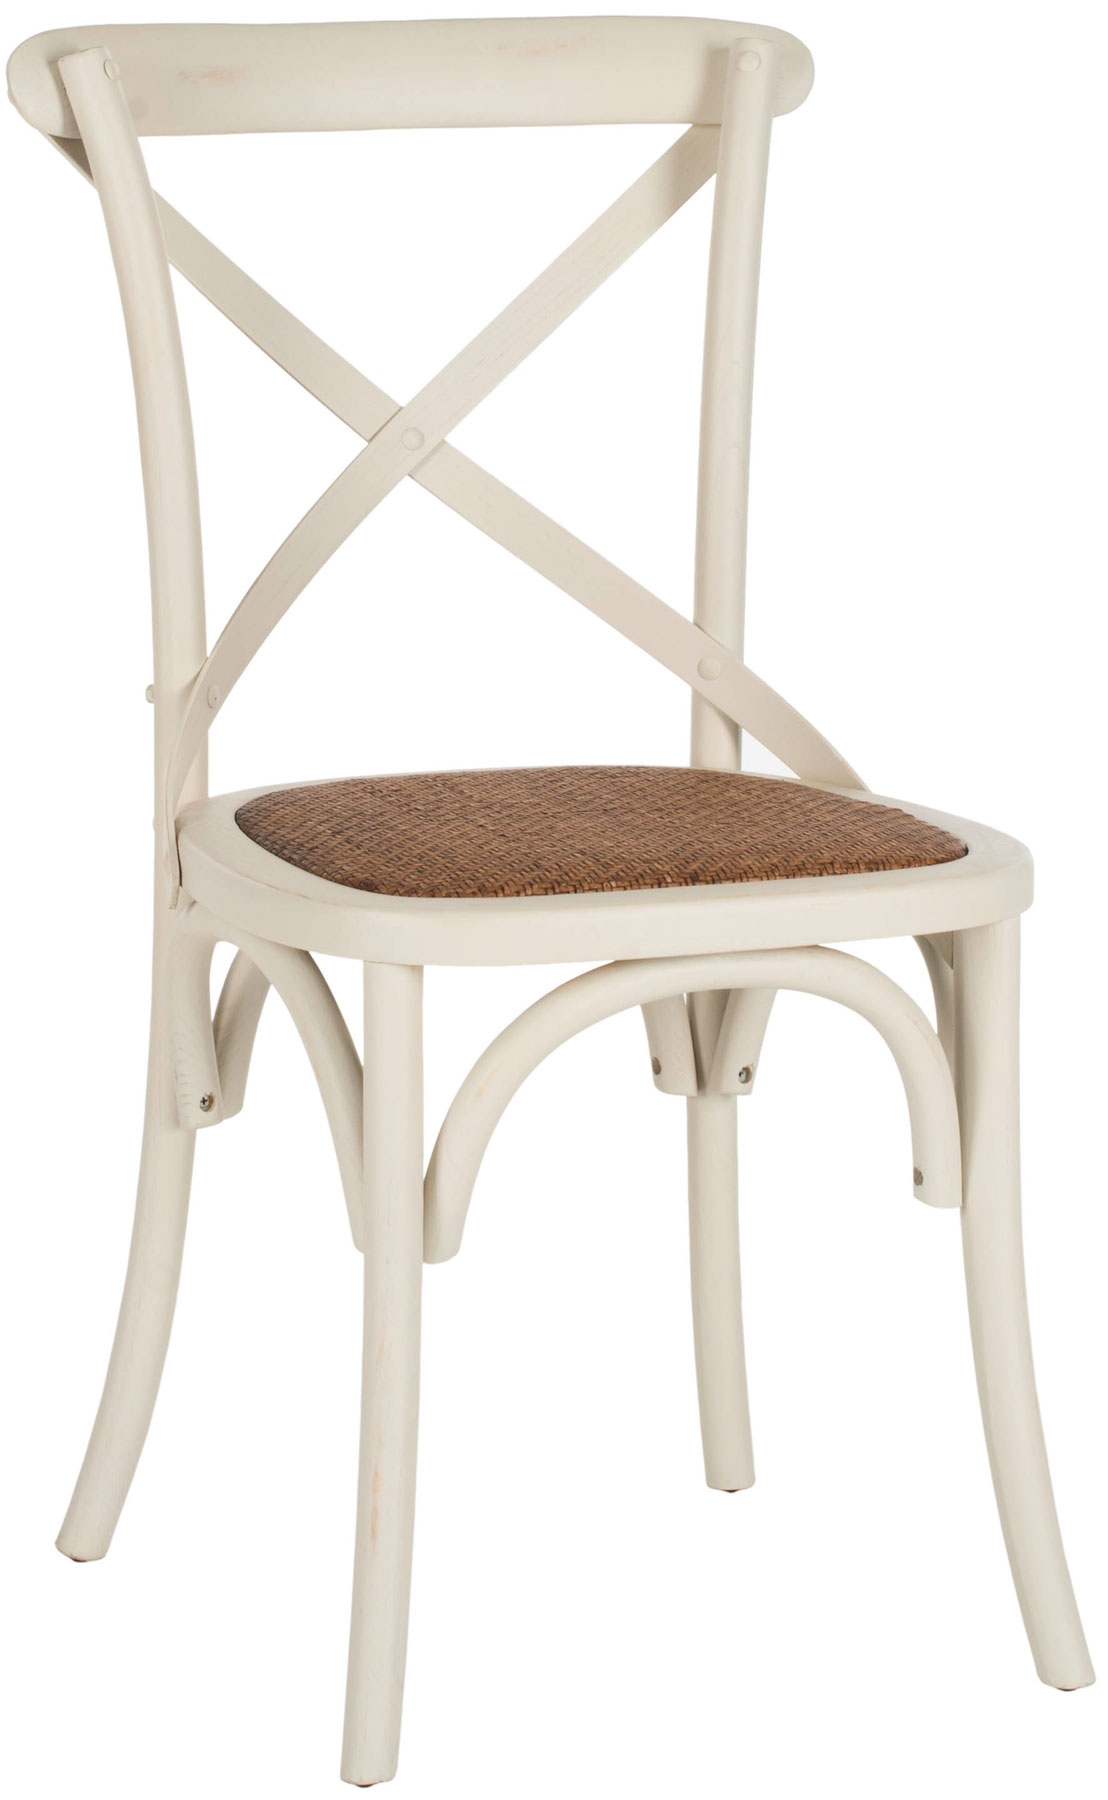 Franklin 18''H X Back Farmhouse Chair (Set Of 2) - Distressed Ivory/Medium Brown - Arlo Home - Image 1